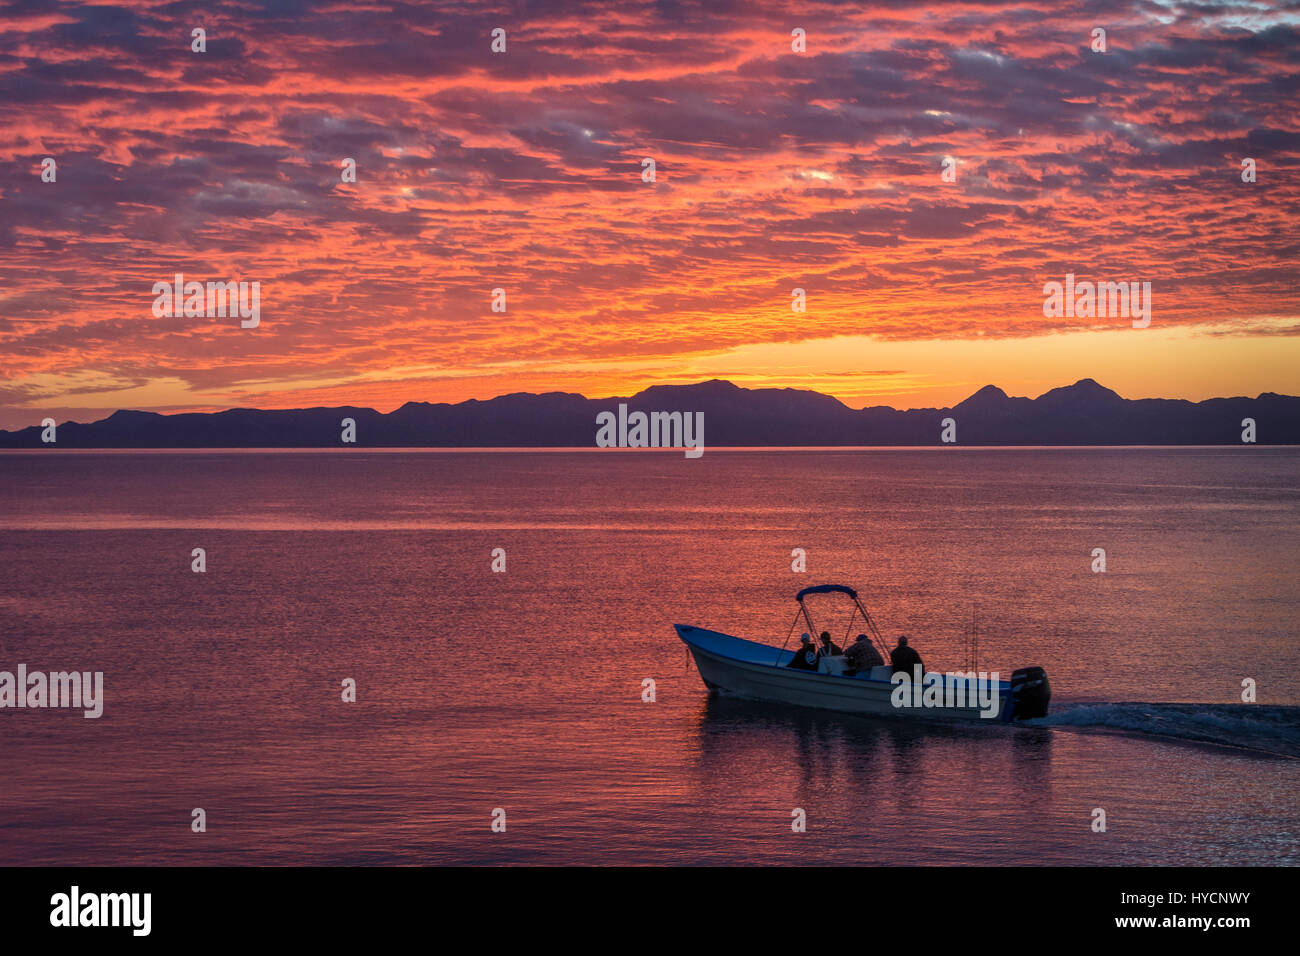 Panga heading out for whale watching in the Sea of Cortez at sunrise, Loreto, Baja California Sur, Mexico. Stock Photo